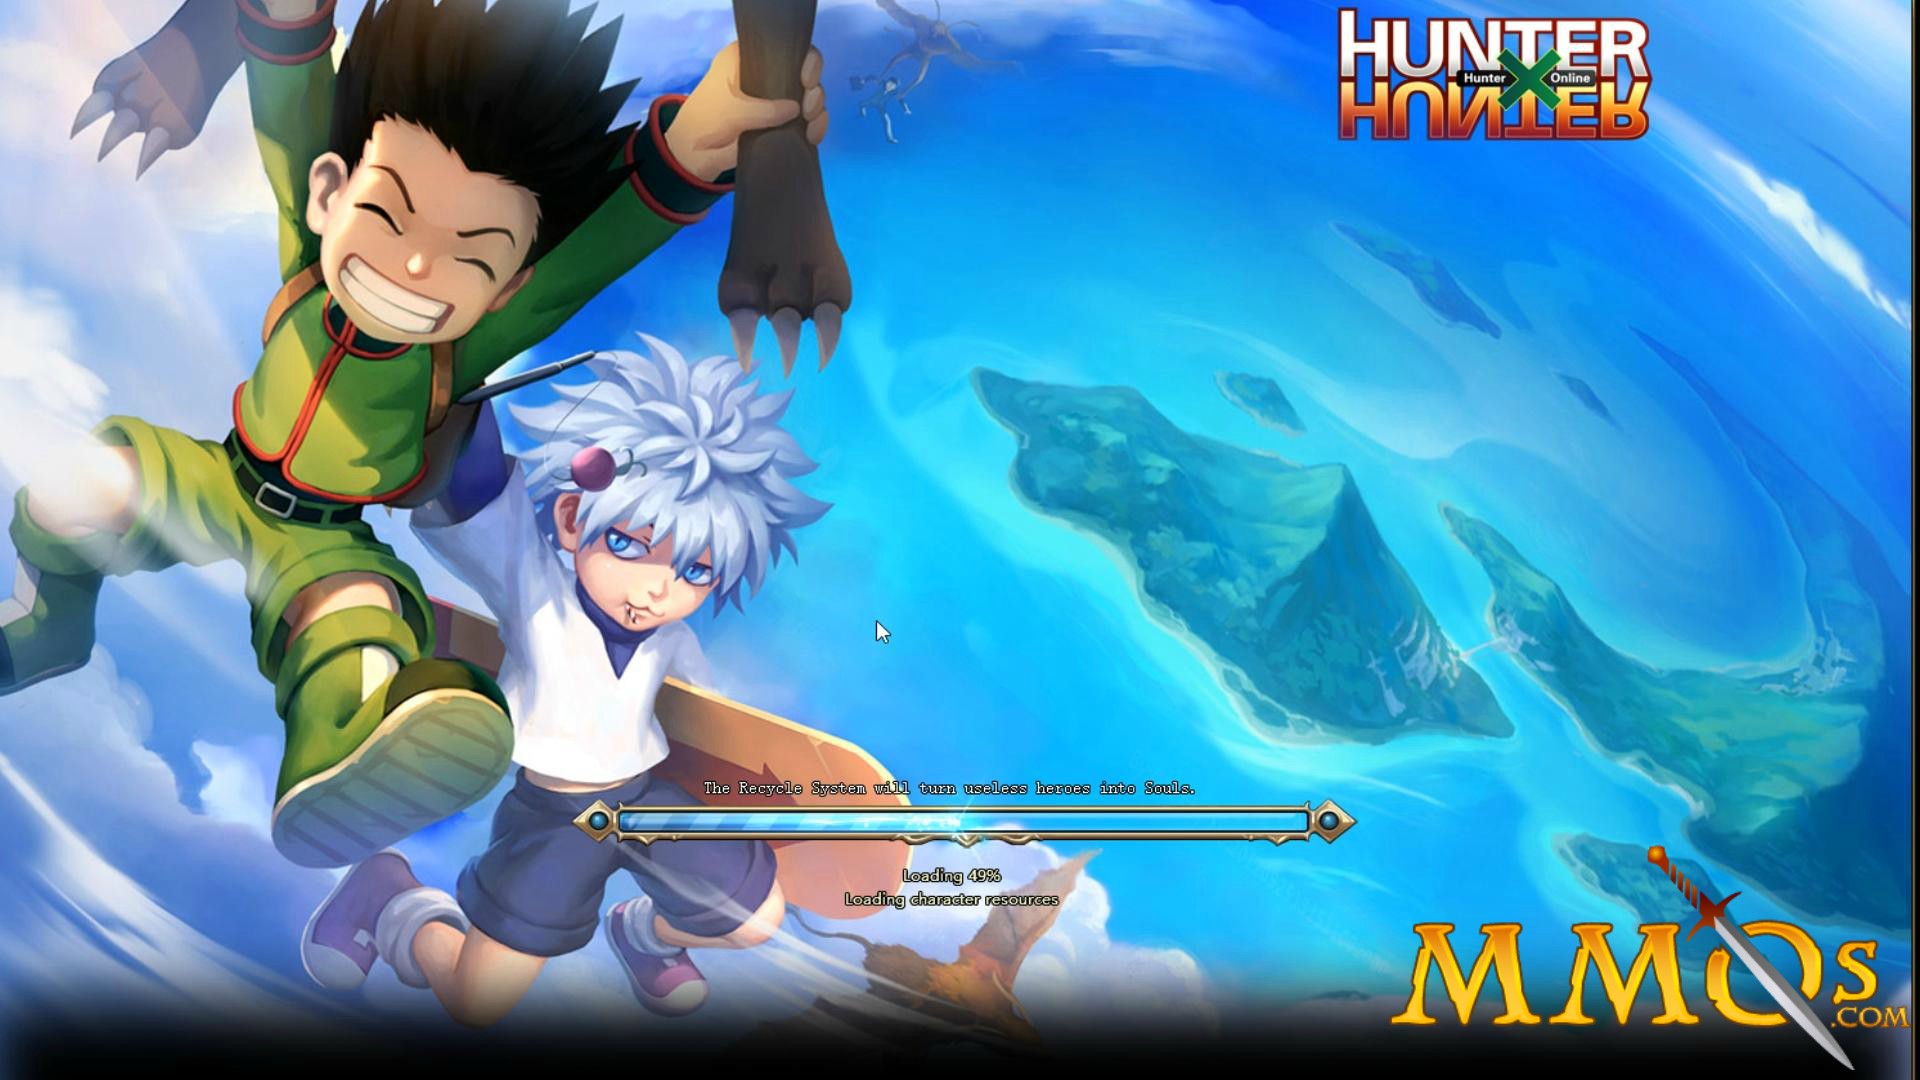 MMORPG ]Hunter X Online GAME - Off-topic Chat - Blender Artists